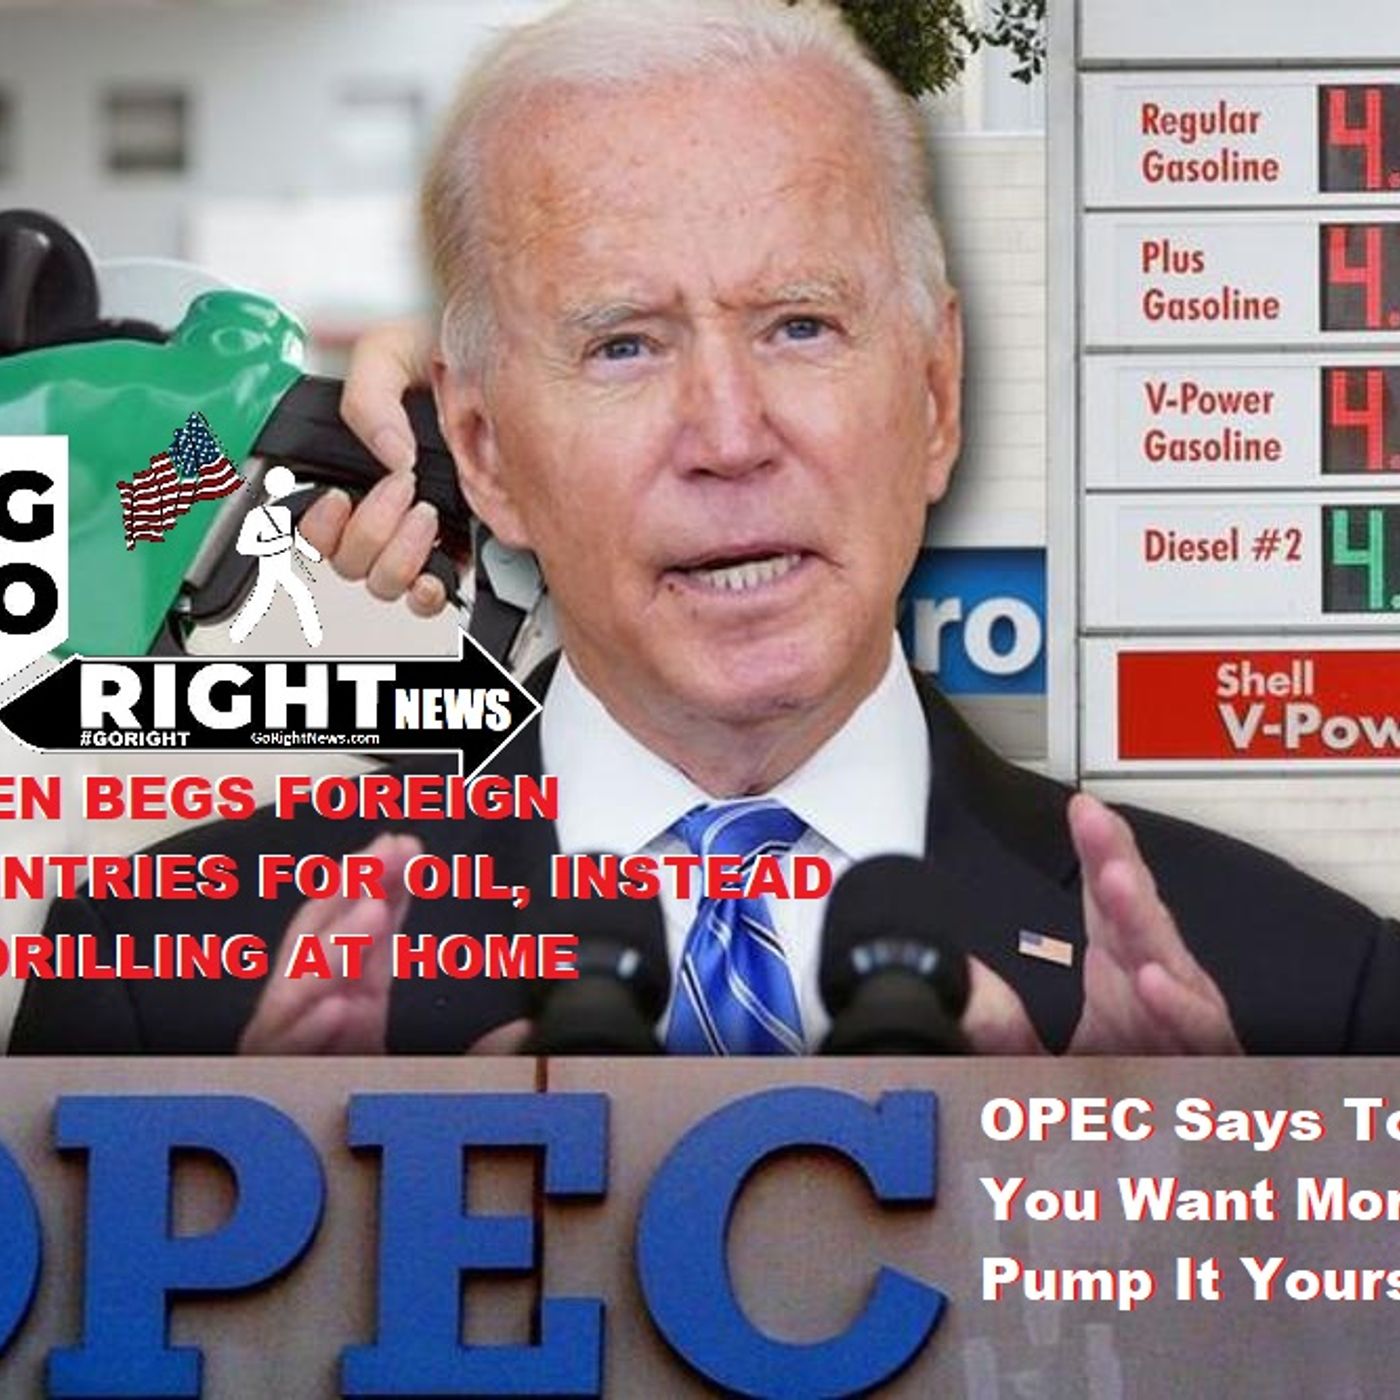 BIDEN BEGS FOREIGN COUNTRIES FOR OIL, INSTEAD OF DRILLING AT HOME